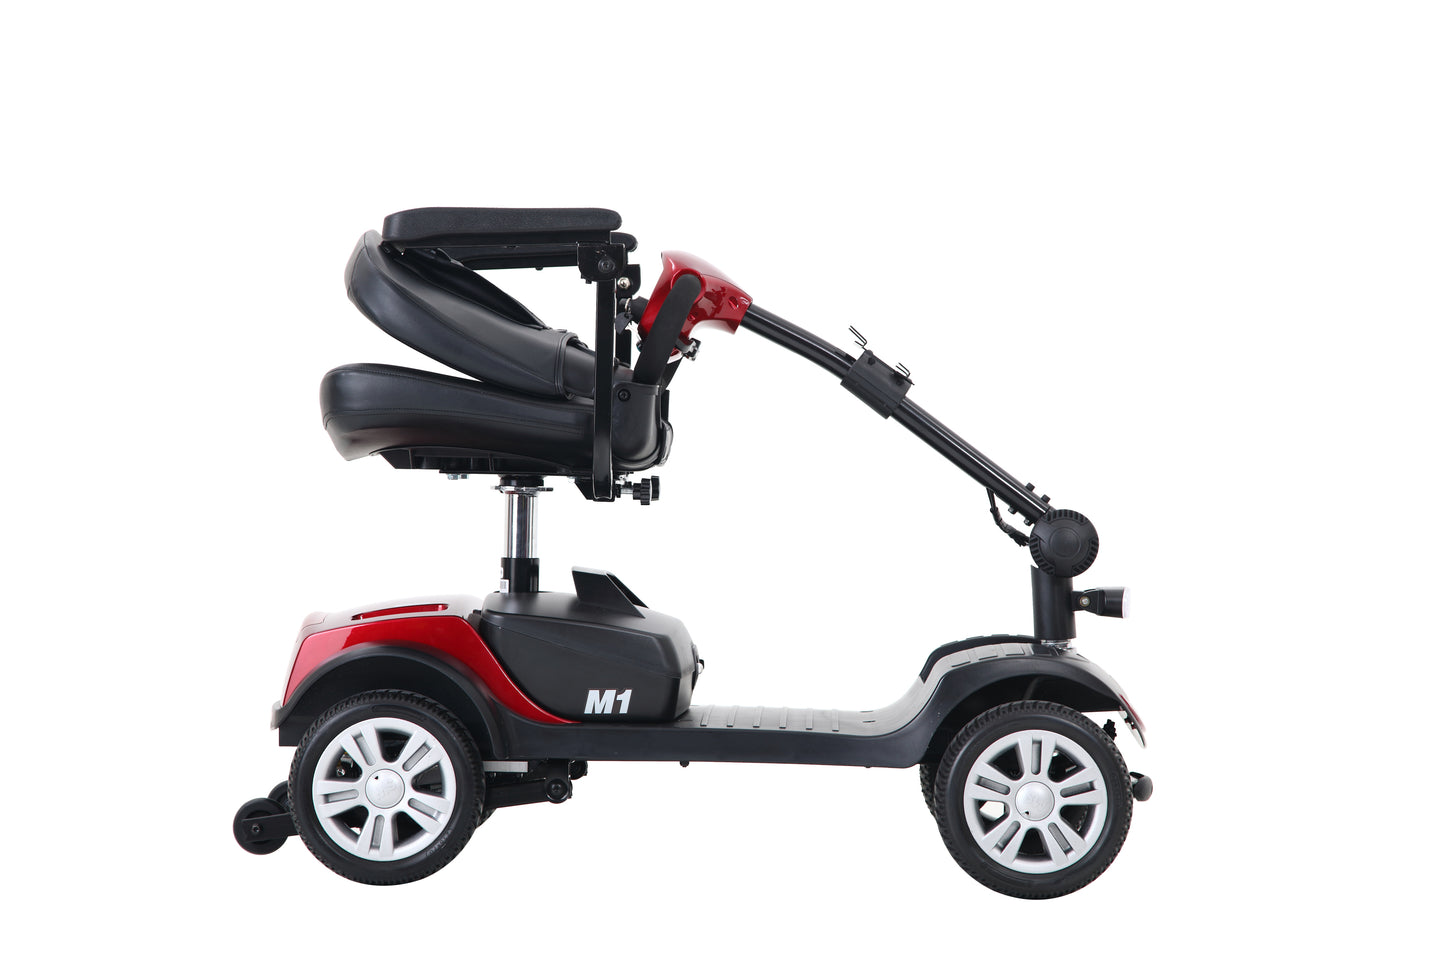 W429S00001 Compact Travel Mobility Scooter